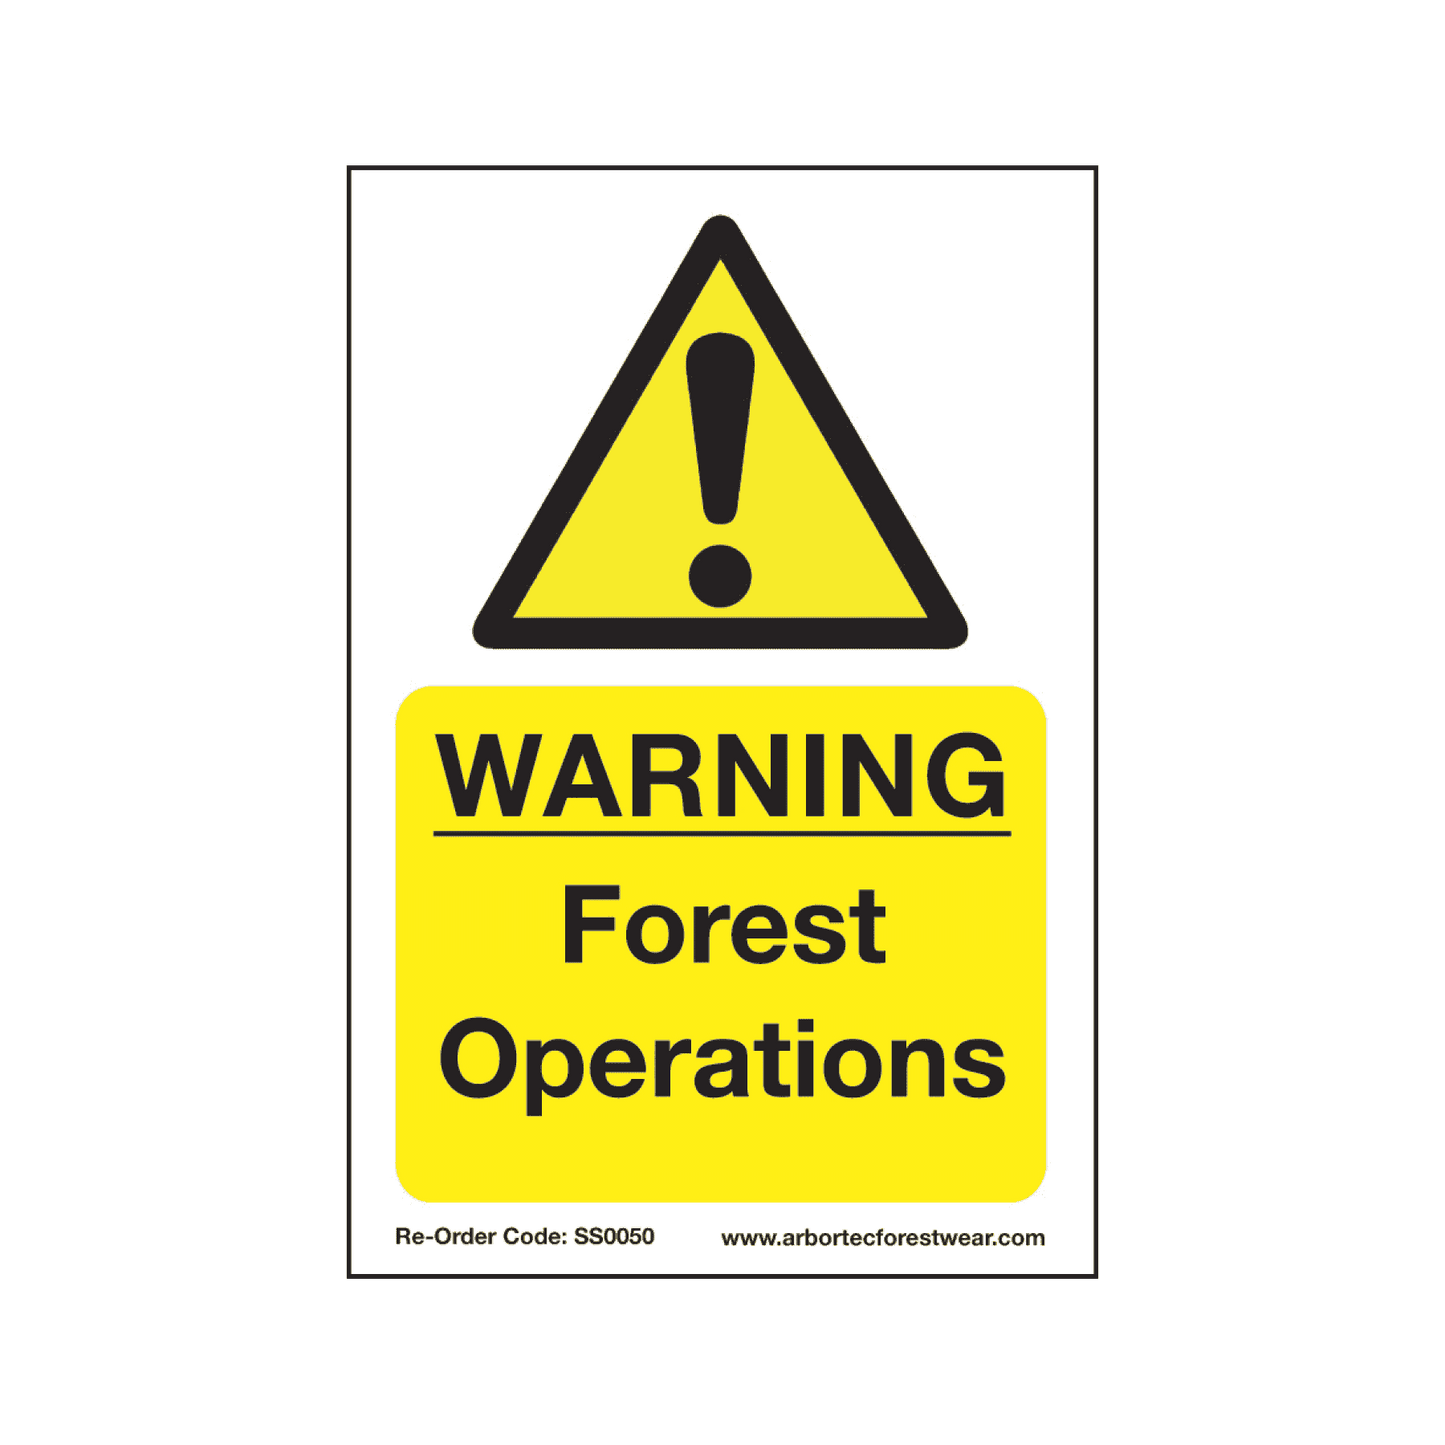 TREEHOG Corex Safety Sign - Warning Forest Operations